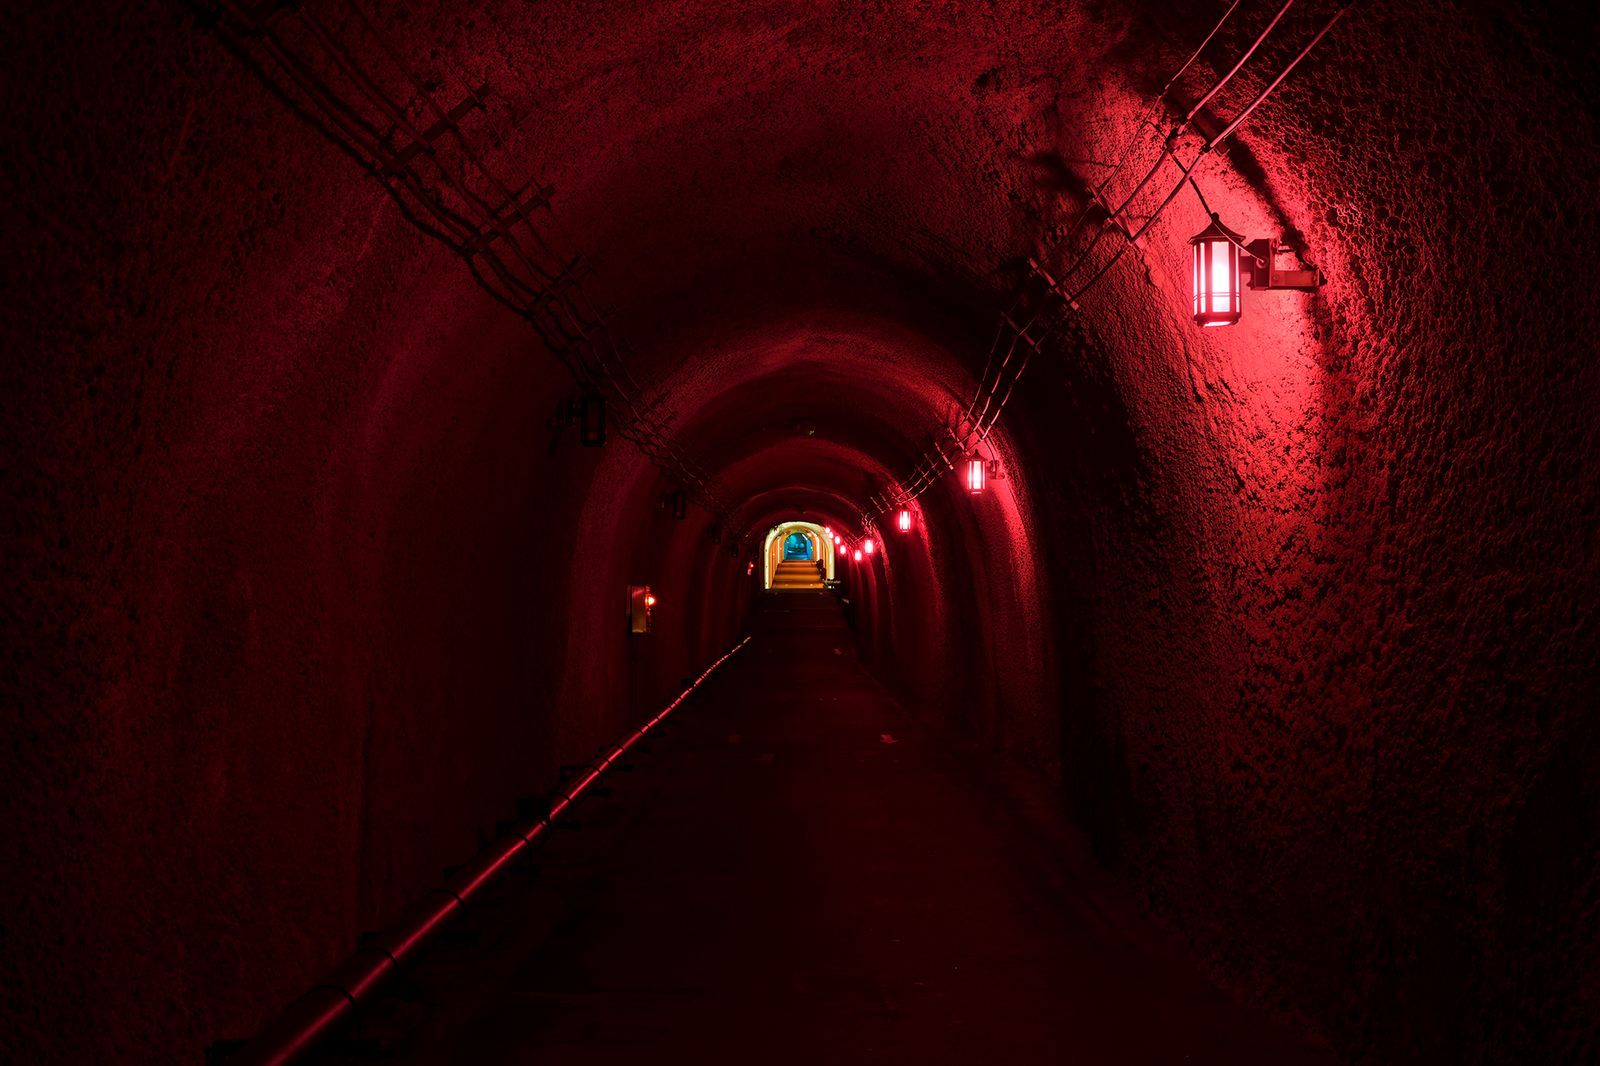 11_MAD_Echigo-Tsumari_Tunnel-of-Light_Expression-of-colors_by-Nacasa-Partners-Inc._low-res.jpg